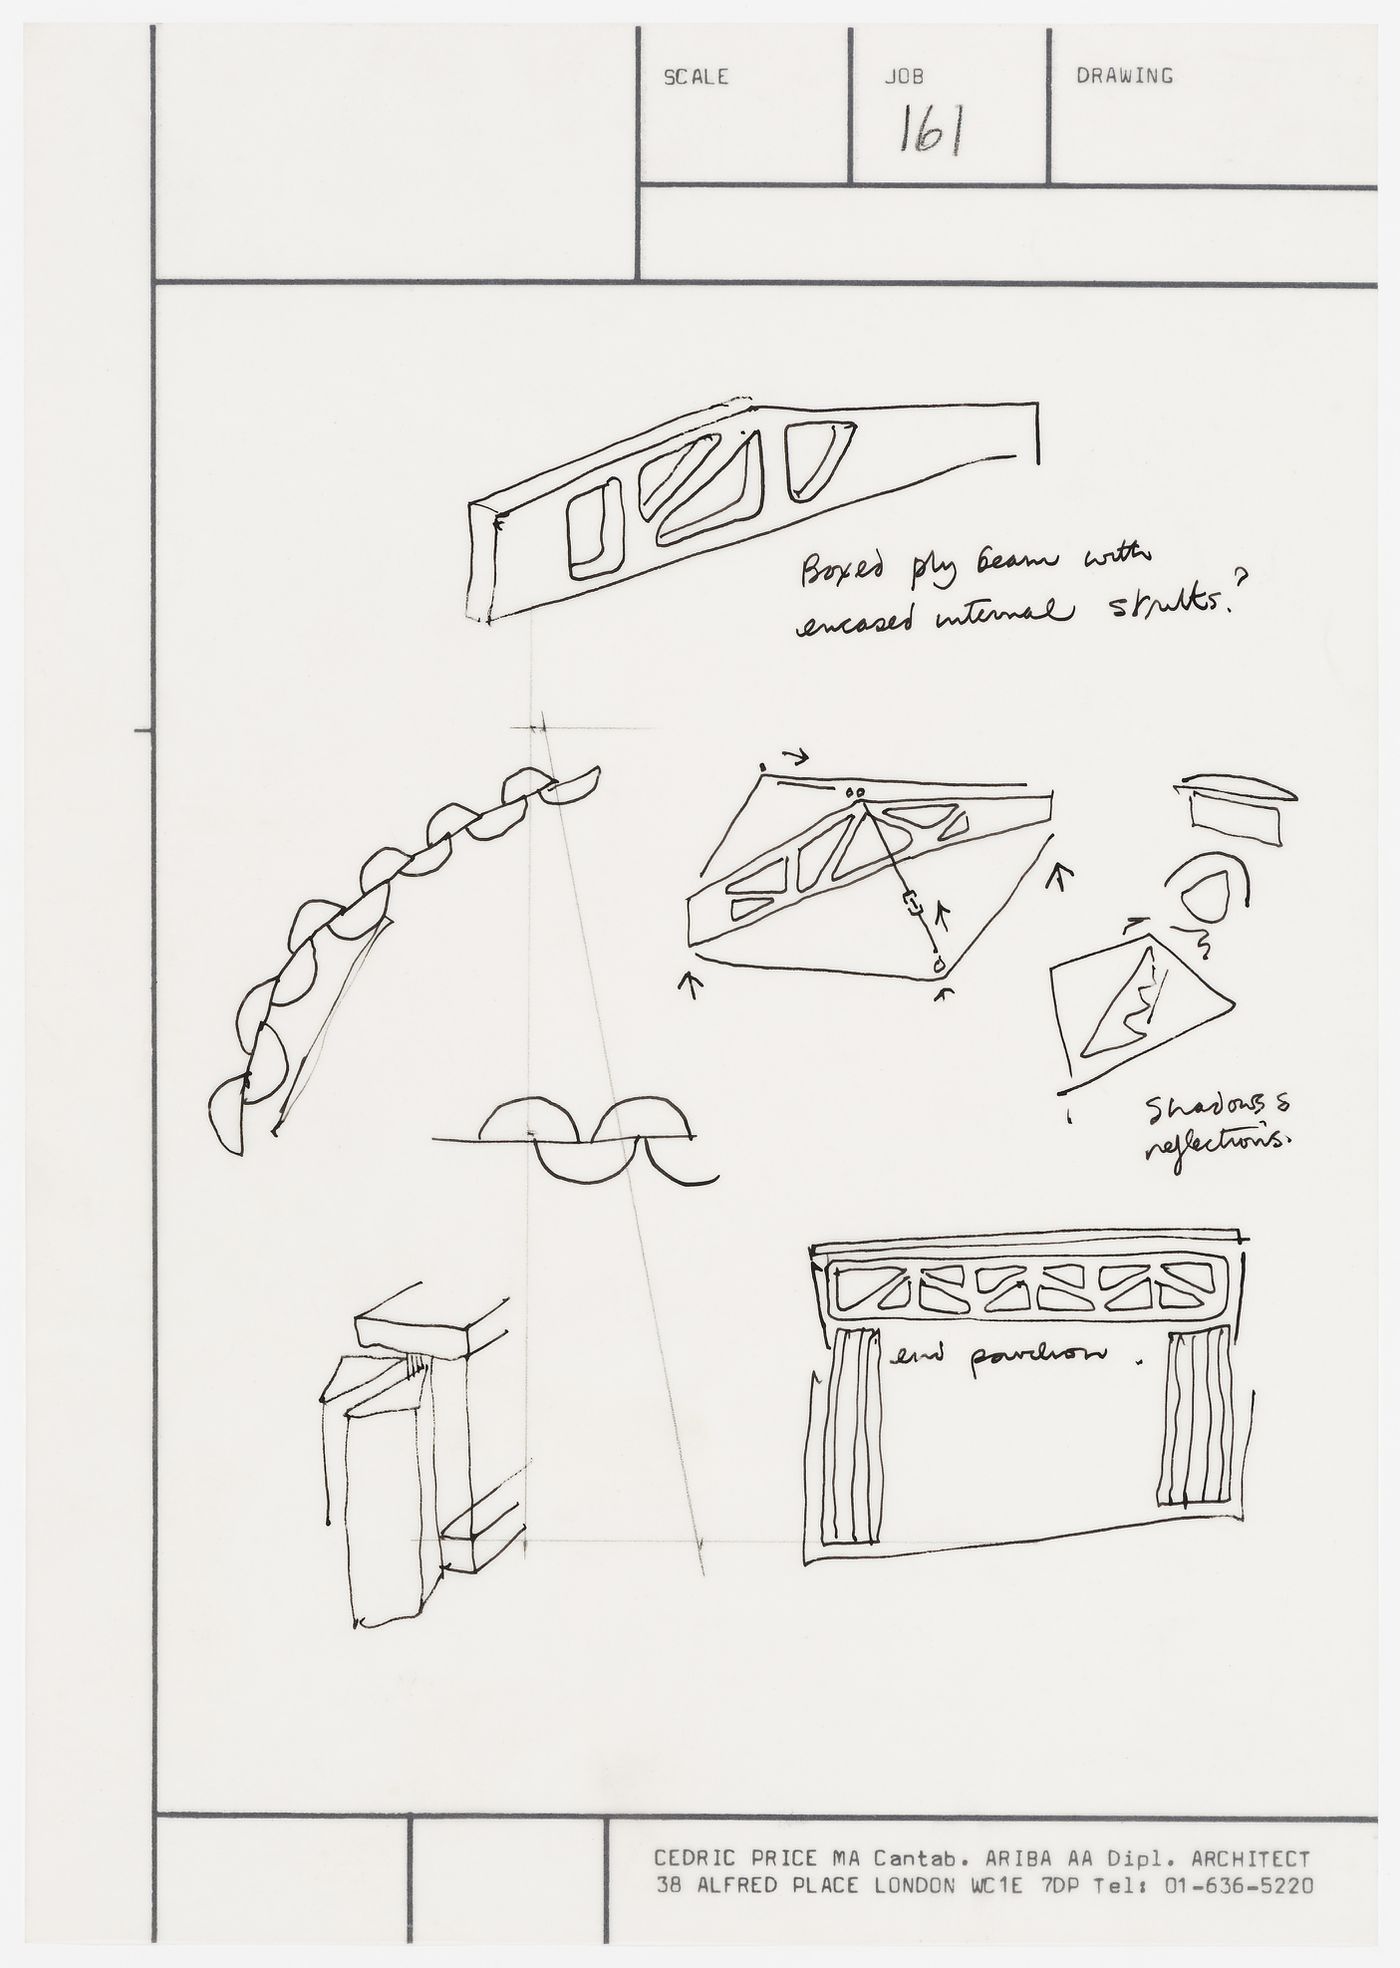 Perthpavs: conceptual sketches, including sketches of beam with internal struts